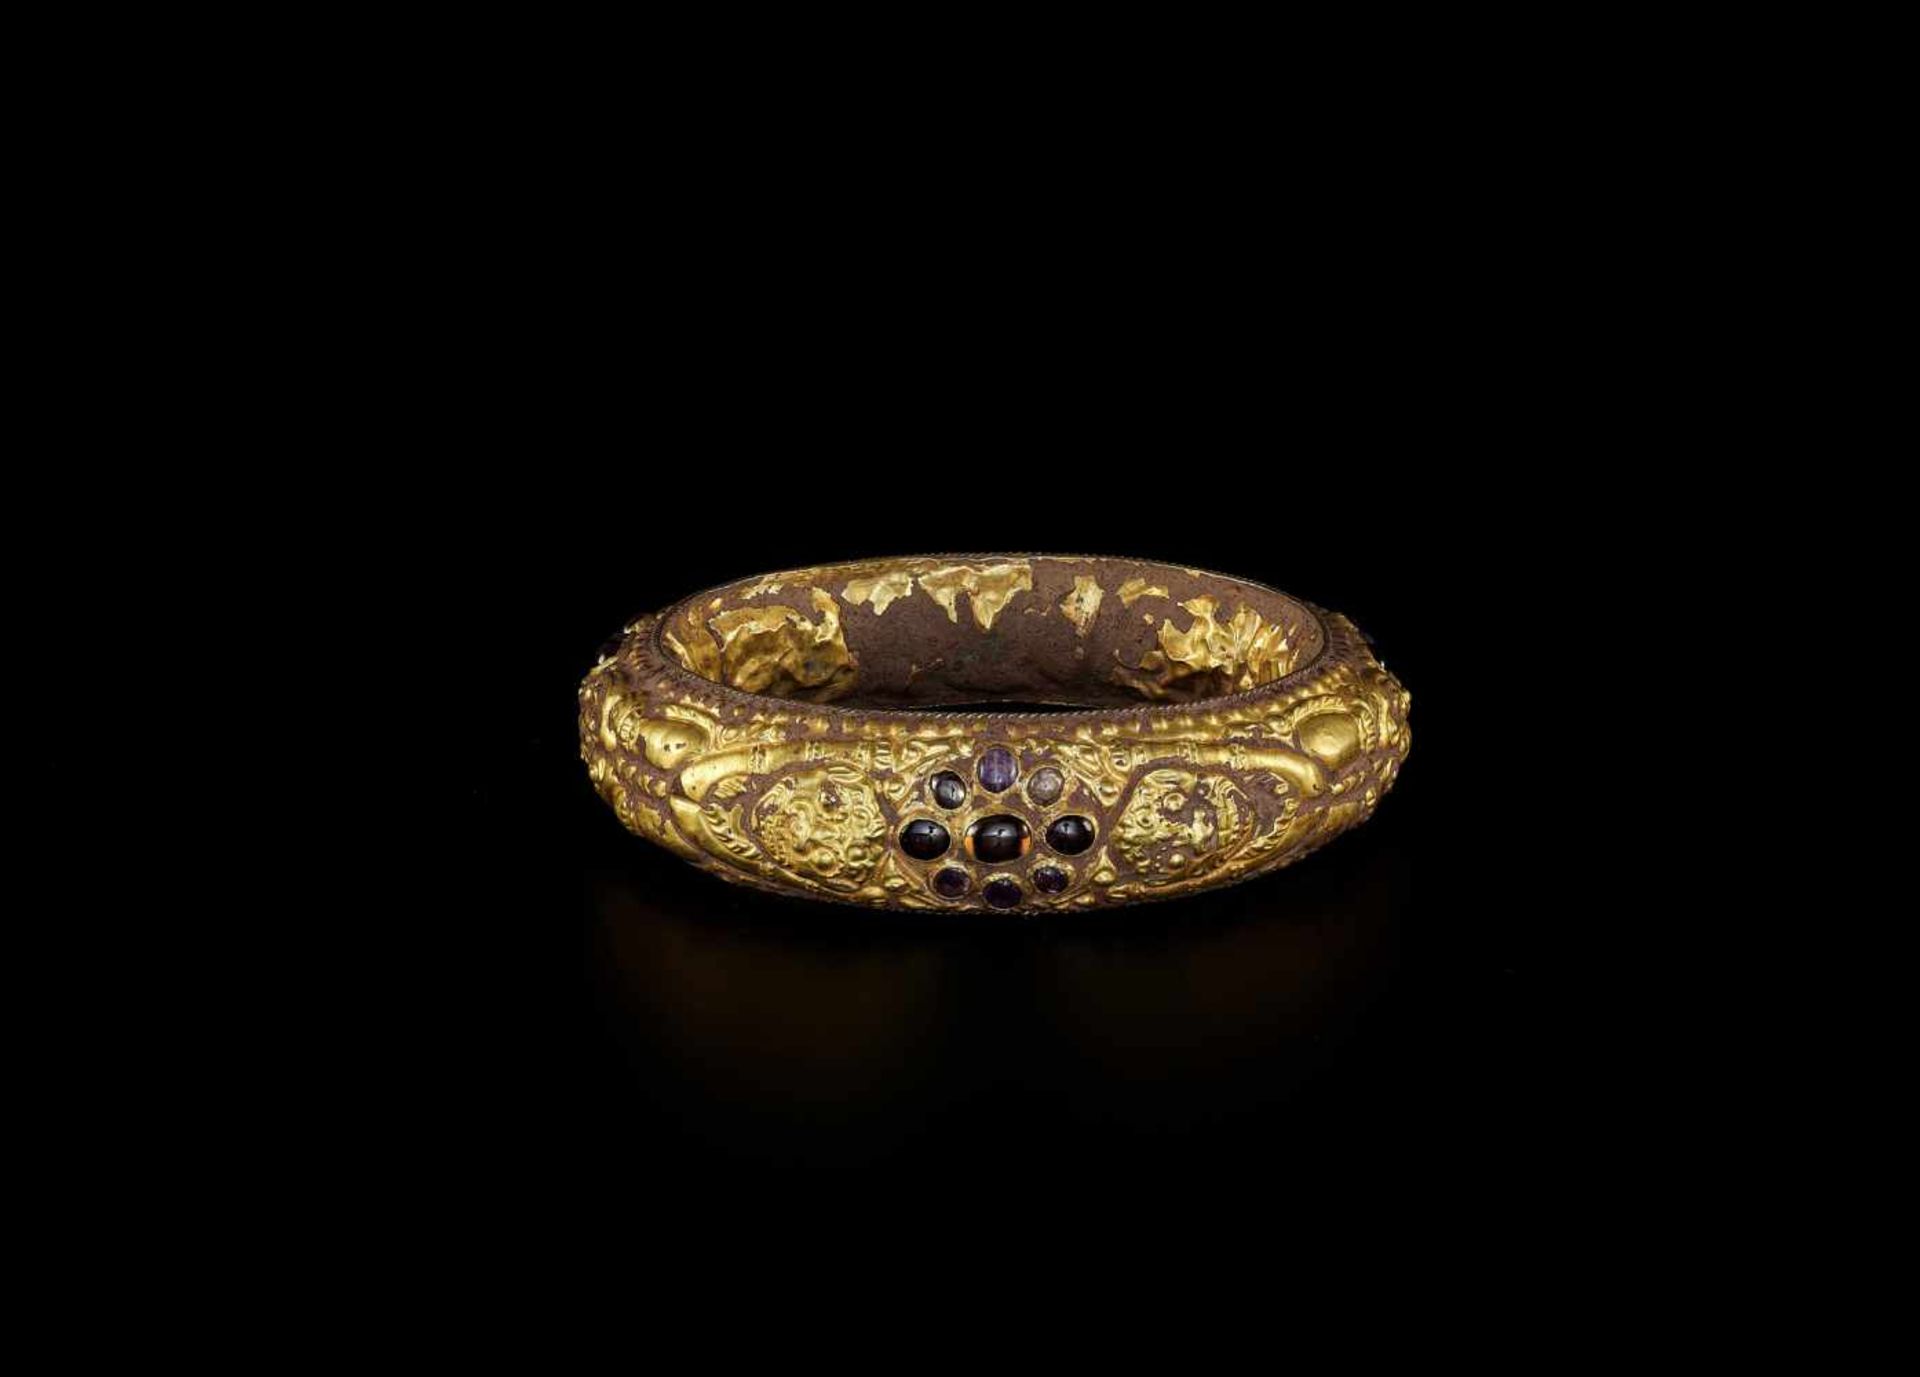 A CHAM REPOUSSÉ GOLD BRACELET WITH A GEMSTONE FLOWER AND GUARDIAN LIONS Champa, classical period,